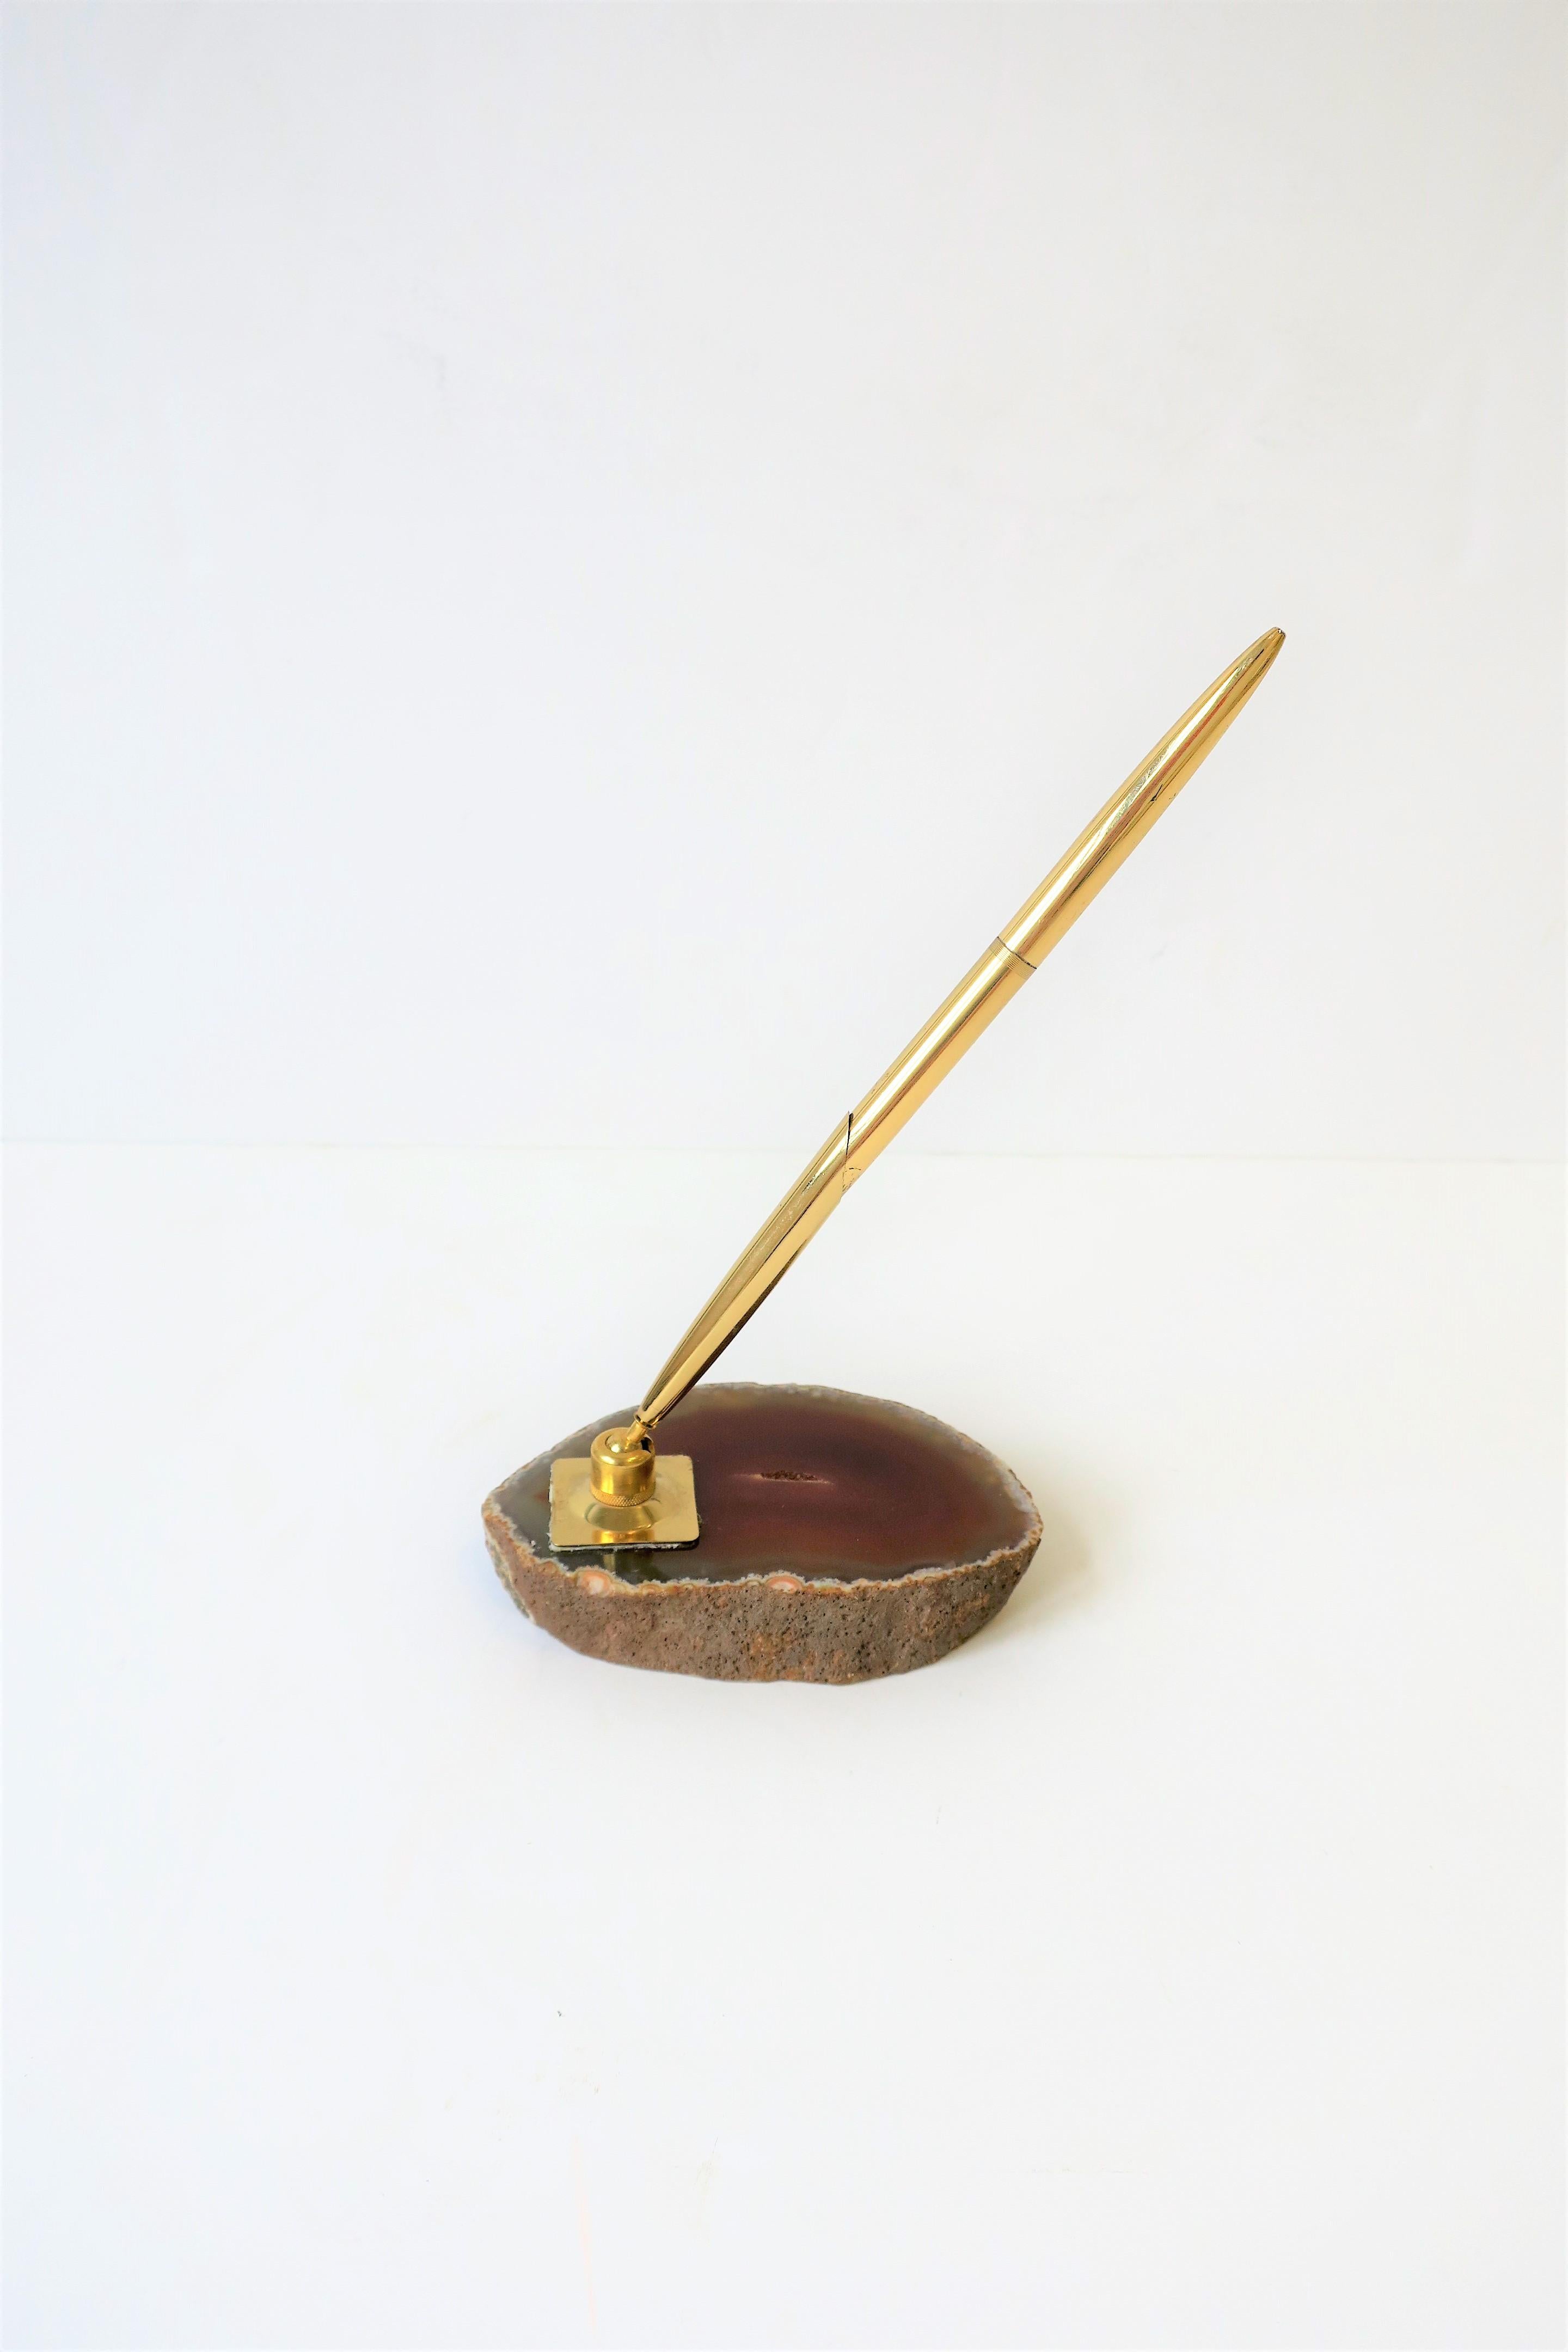 Modern Agate Onyx and Brass Desk Pen Holder, circa 1970s For Sale